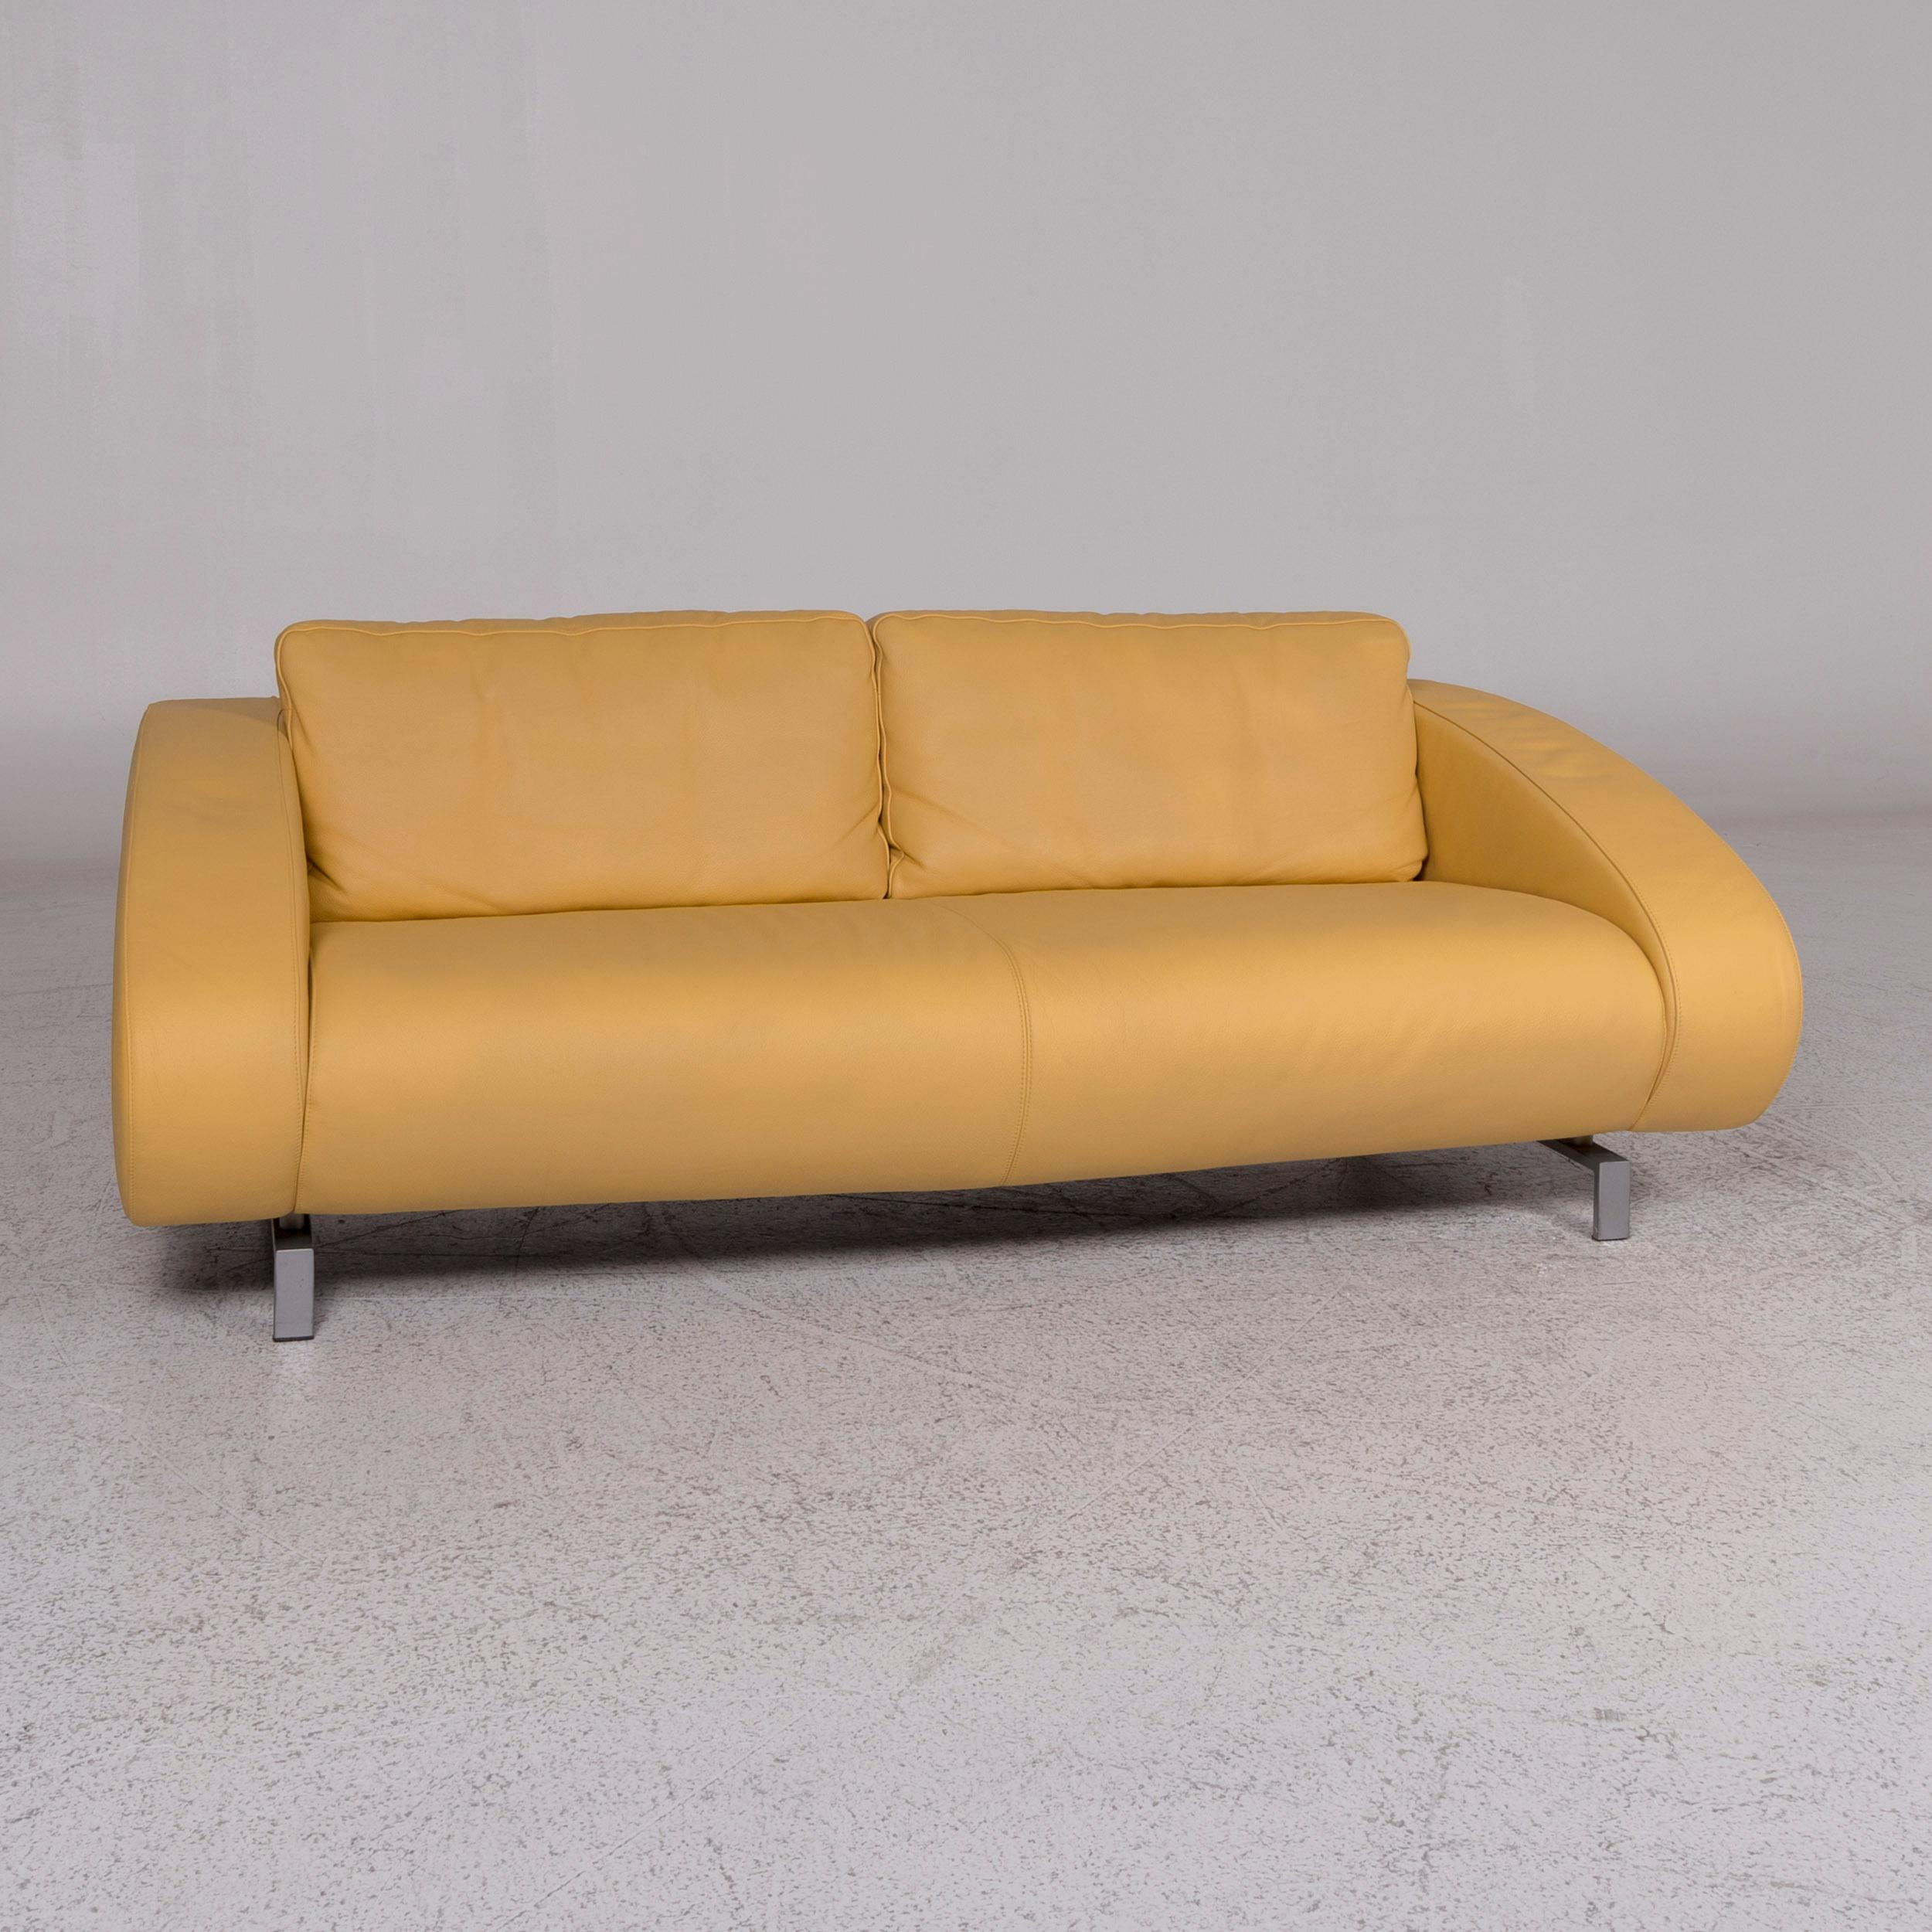 We bring to you a Machalke leather sofa yellow two-seat.
   
 
 Product measurements in centimeters:
 
 Depth 105
Width 185
Height 69
Seat-height 39
Rest-height 53
Seat-depth 53
Seat-width 147
Back-height 30.